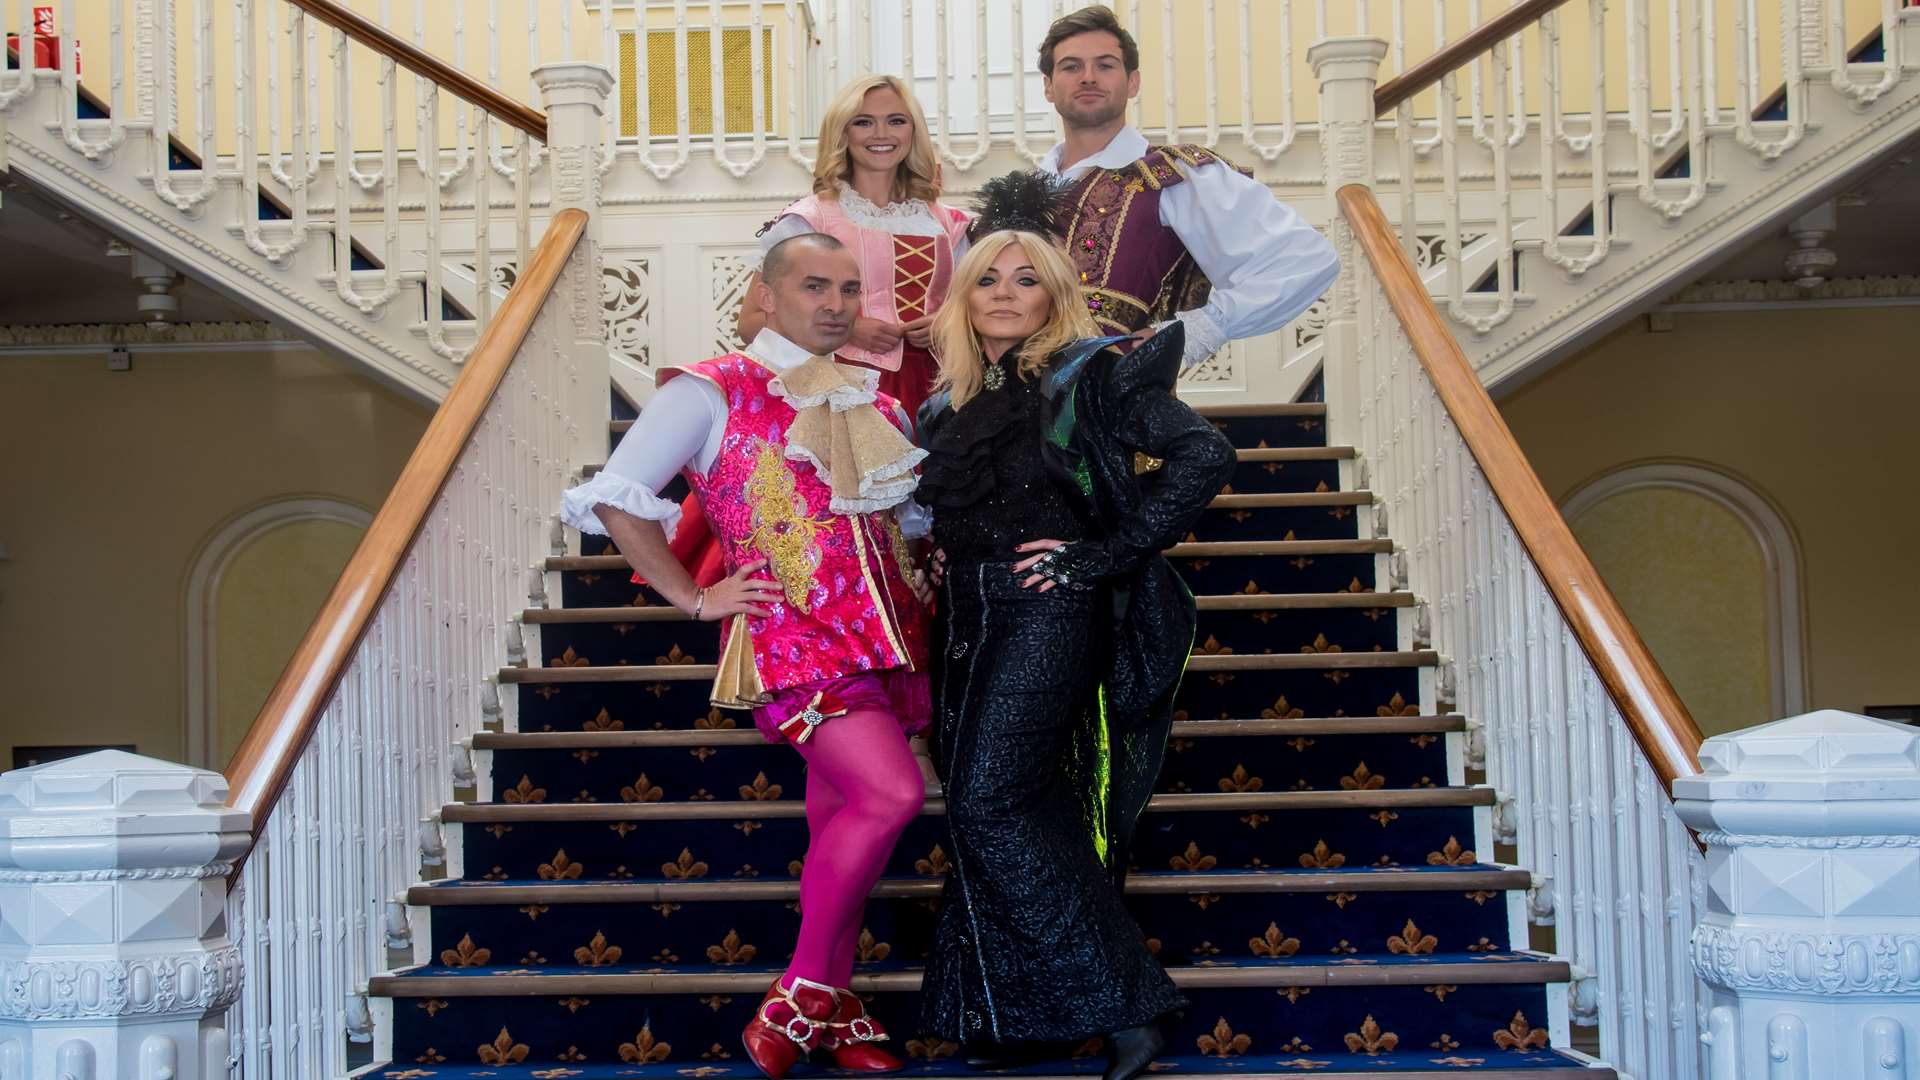 The stars of the Orchard Theatre's pantomime this Christmas, Cinderella